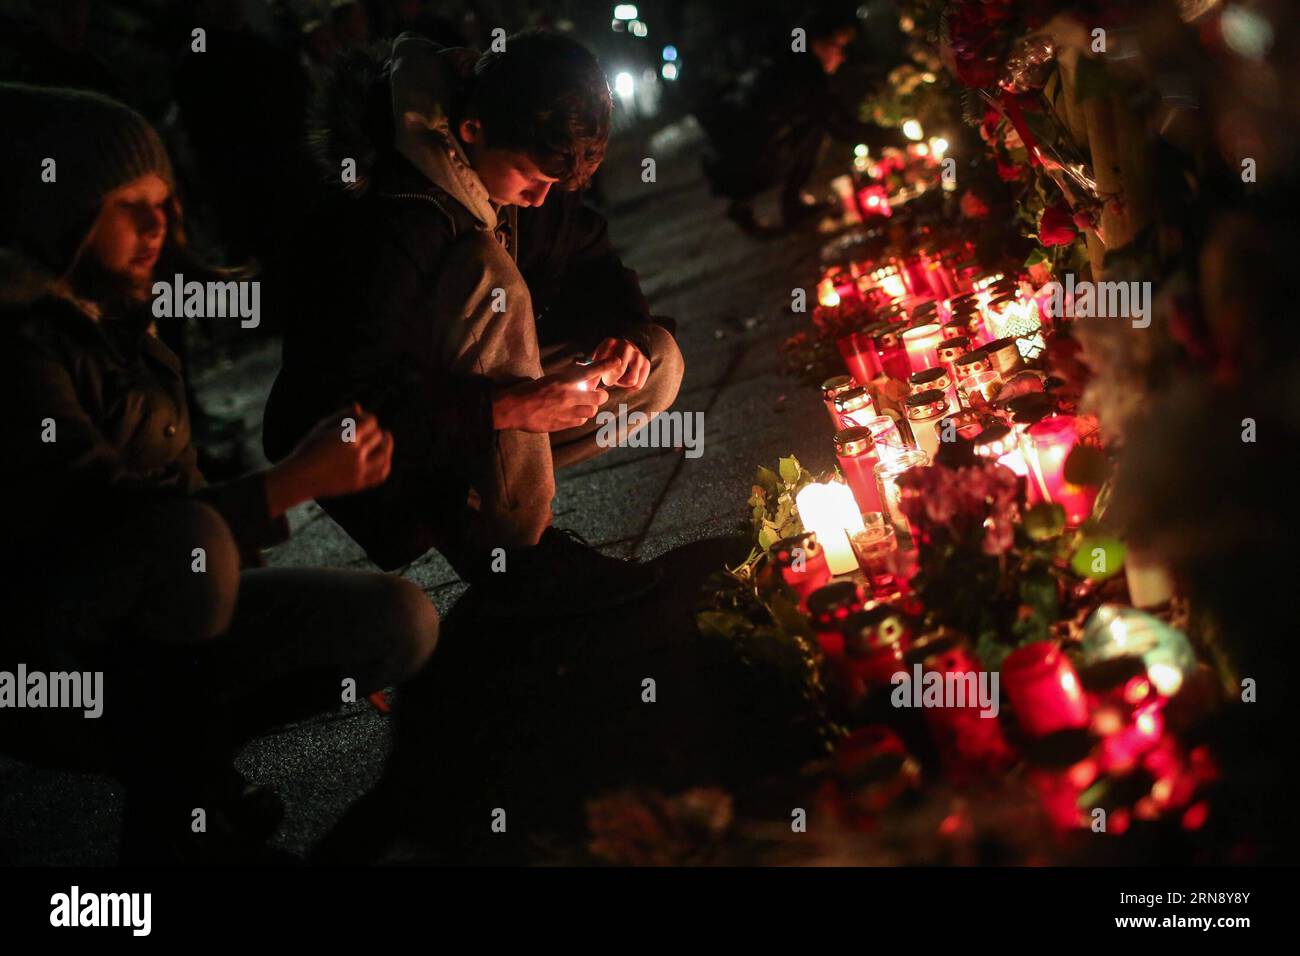 (151110) -- HAMBURG, Nov. 10, 2015 -- Local residents lay flowers and candles outside the home of former German chancellor Helmut Schmidt, in Hamburg, Germany, on Nov. 10, 2015. Helmut Schmidt, who served as Chancellor of West Germany from 1974 to 1982, died at age of 96 at his home in Hamburg on Tuesday afternoon, according to German media. ) GERMANY-HAMBURG-SCHMIDT-PASSING AWAY ZhangxFan PUBLICATIONxNOTxINxCHN Stille Trauer vor Helmut Schmidts Wohnhaus in Hamburg   Hamburg Nov 10 2015 Local Residents Lay Flowers and Candles outside The Home of Former German Chancellor Helmut Schmidt in Hambu Stock Photo